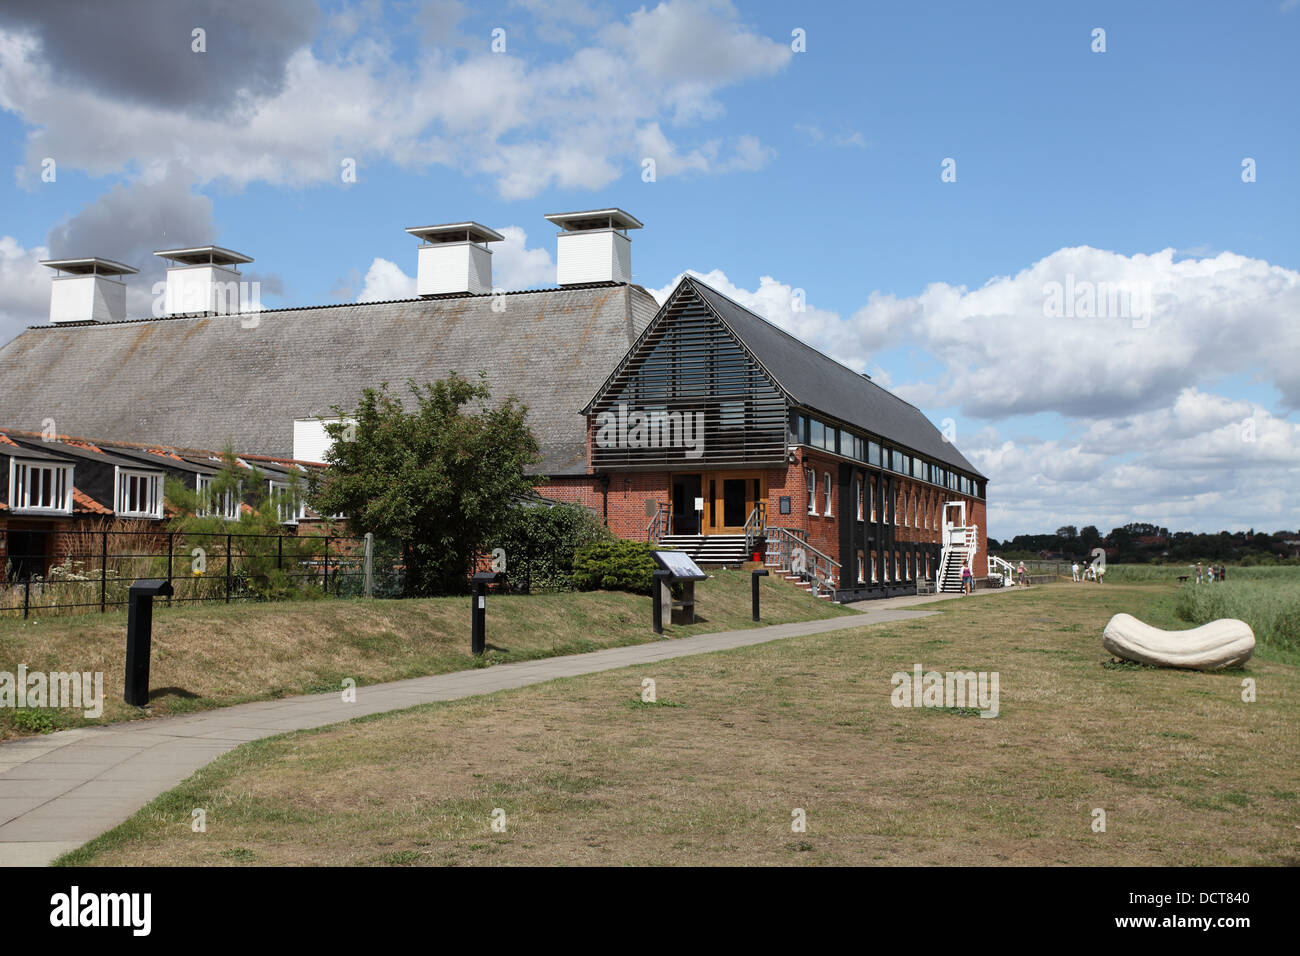 Snape Maltings is home to shops, concert hall, art and art Galleries near Aldeburgh, Suffolk Stock Photo